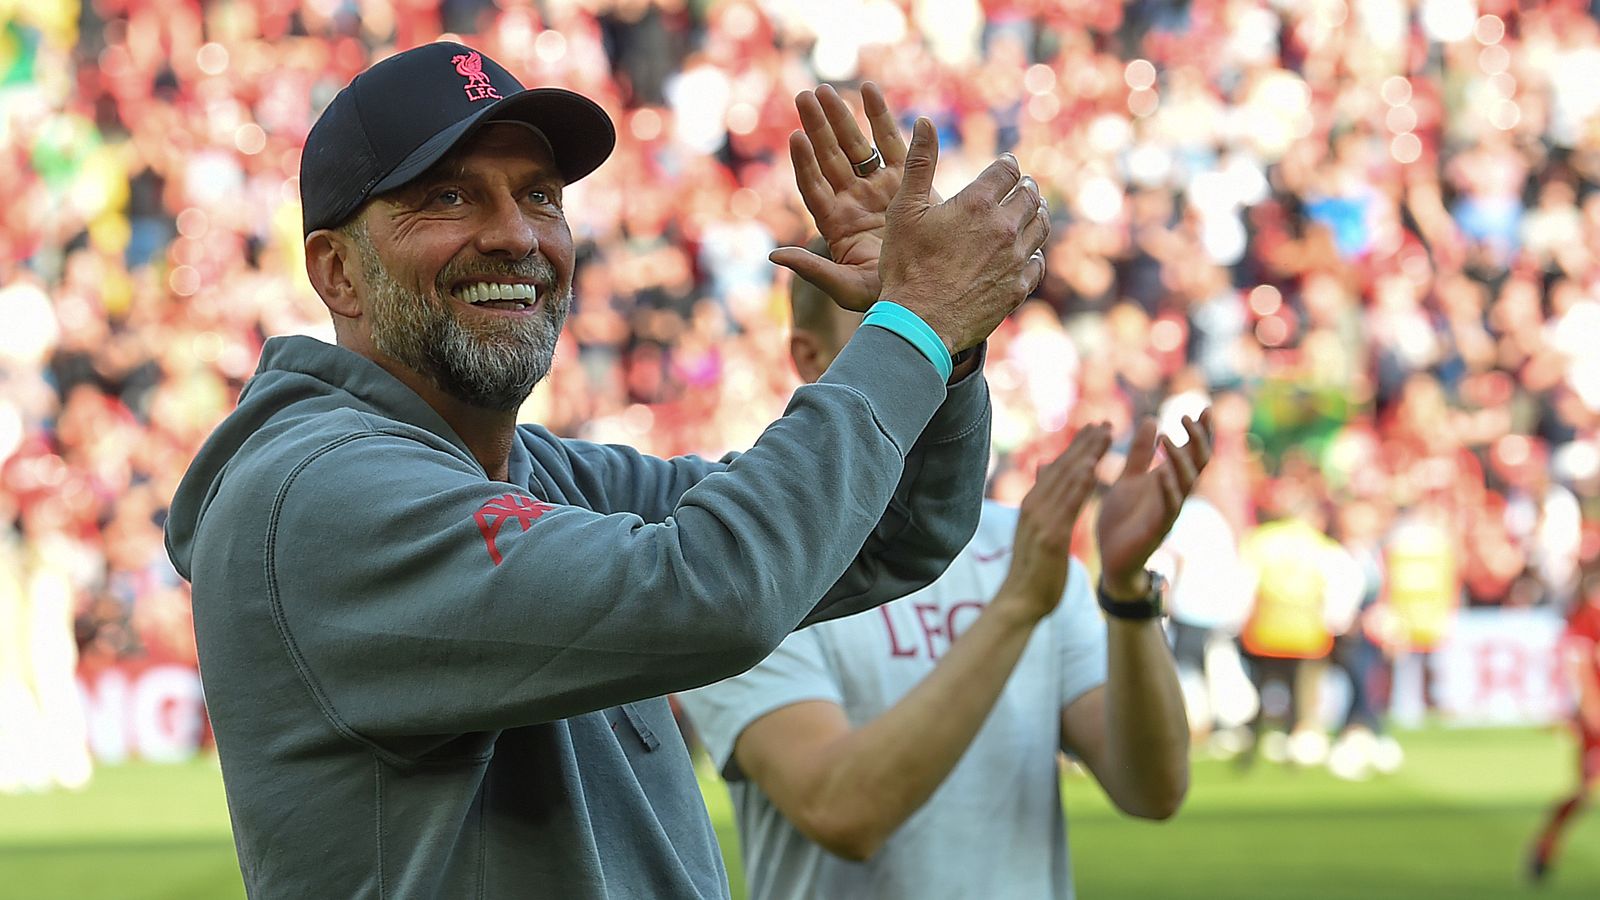 Jurgen Klopp: Liverpool unity our trophy this year despite missing out on Champions League | Football News